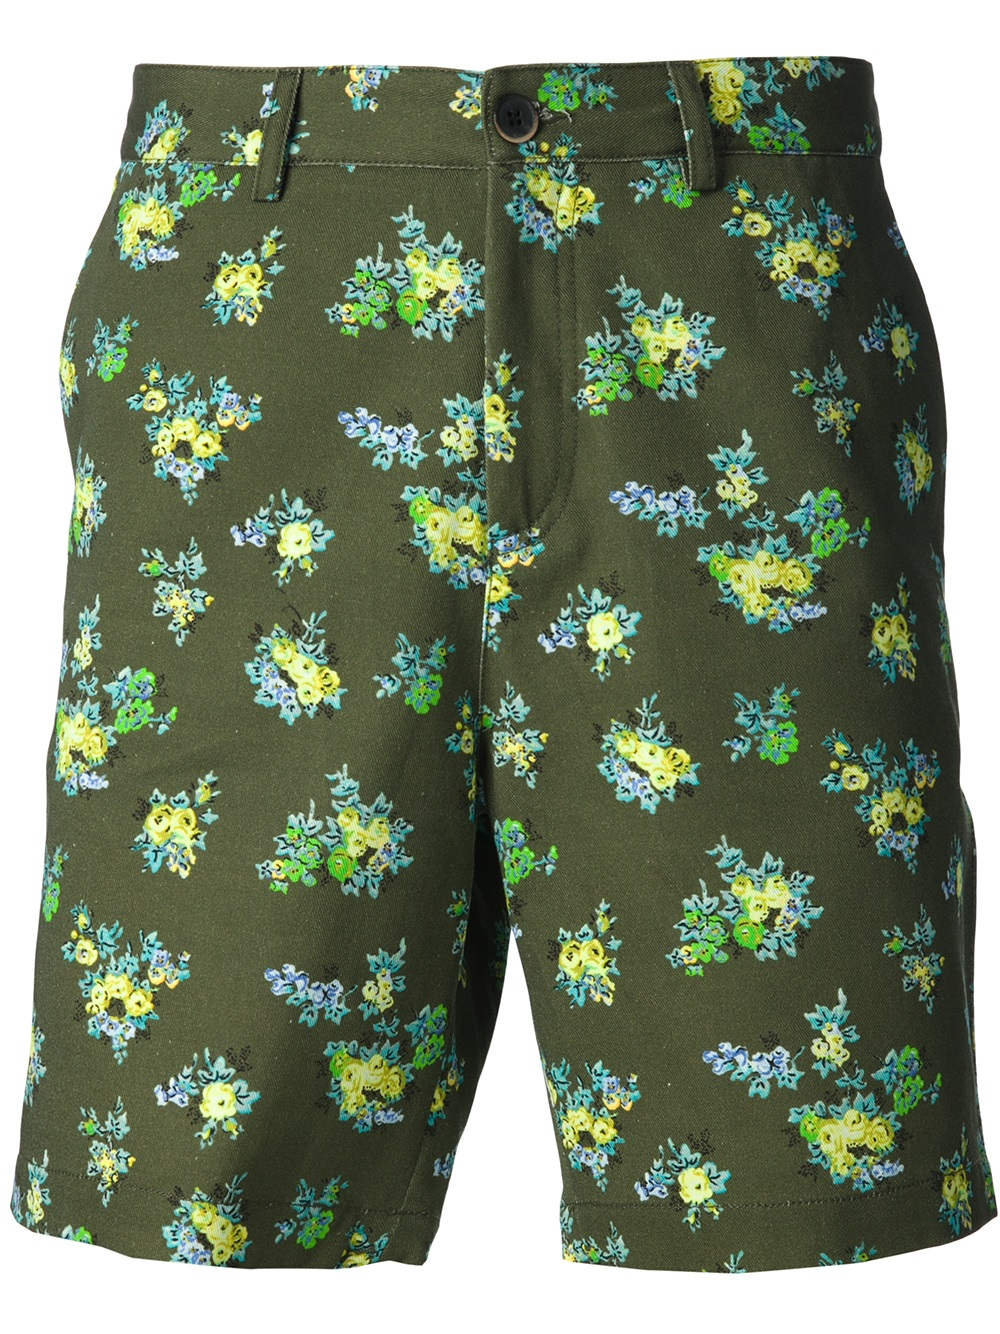 Msgm Floral Print Bermuda Shorts in Green for Men - Save 77% | Lyst